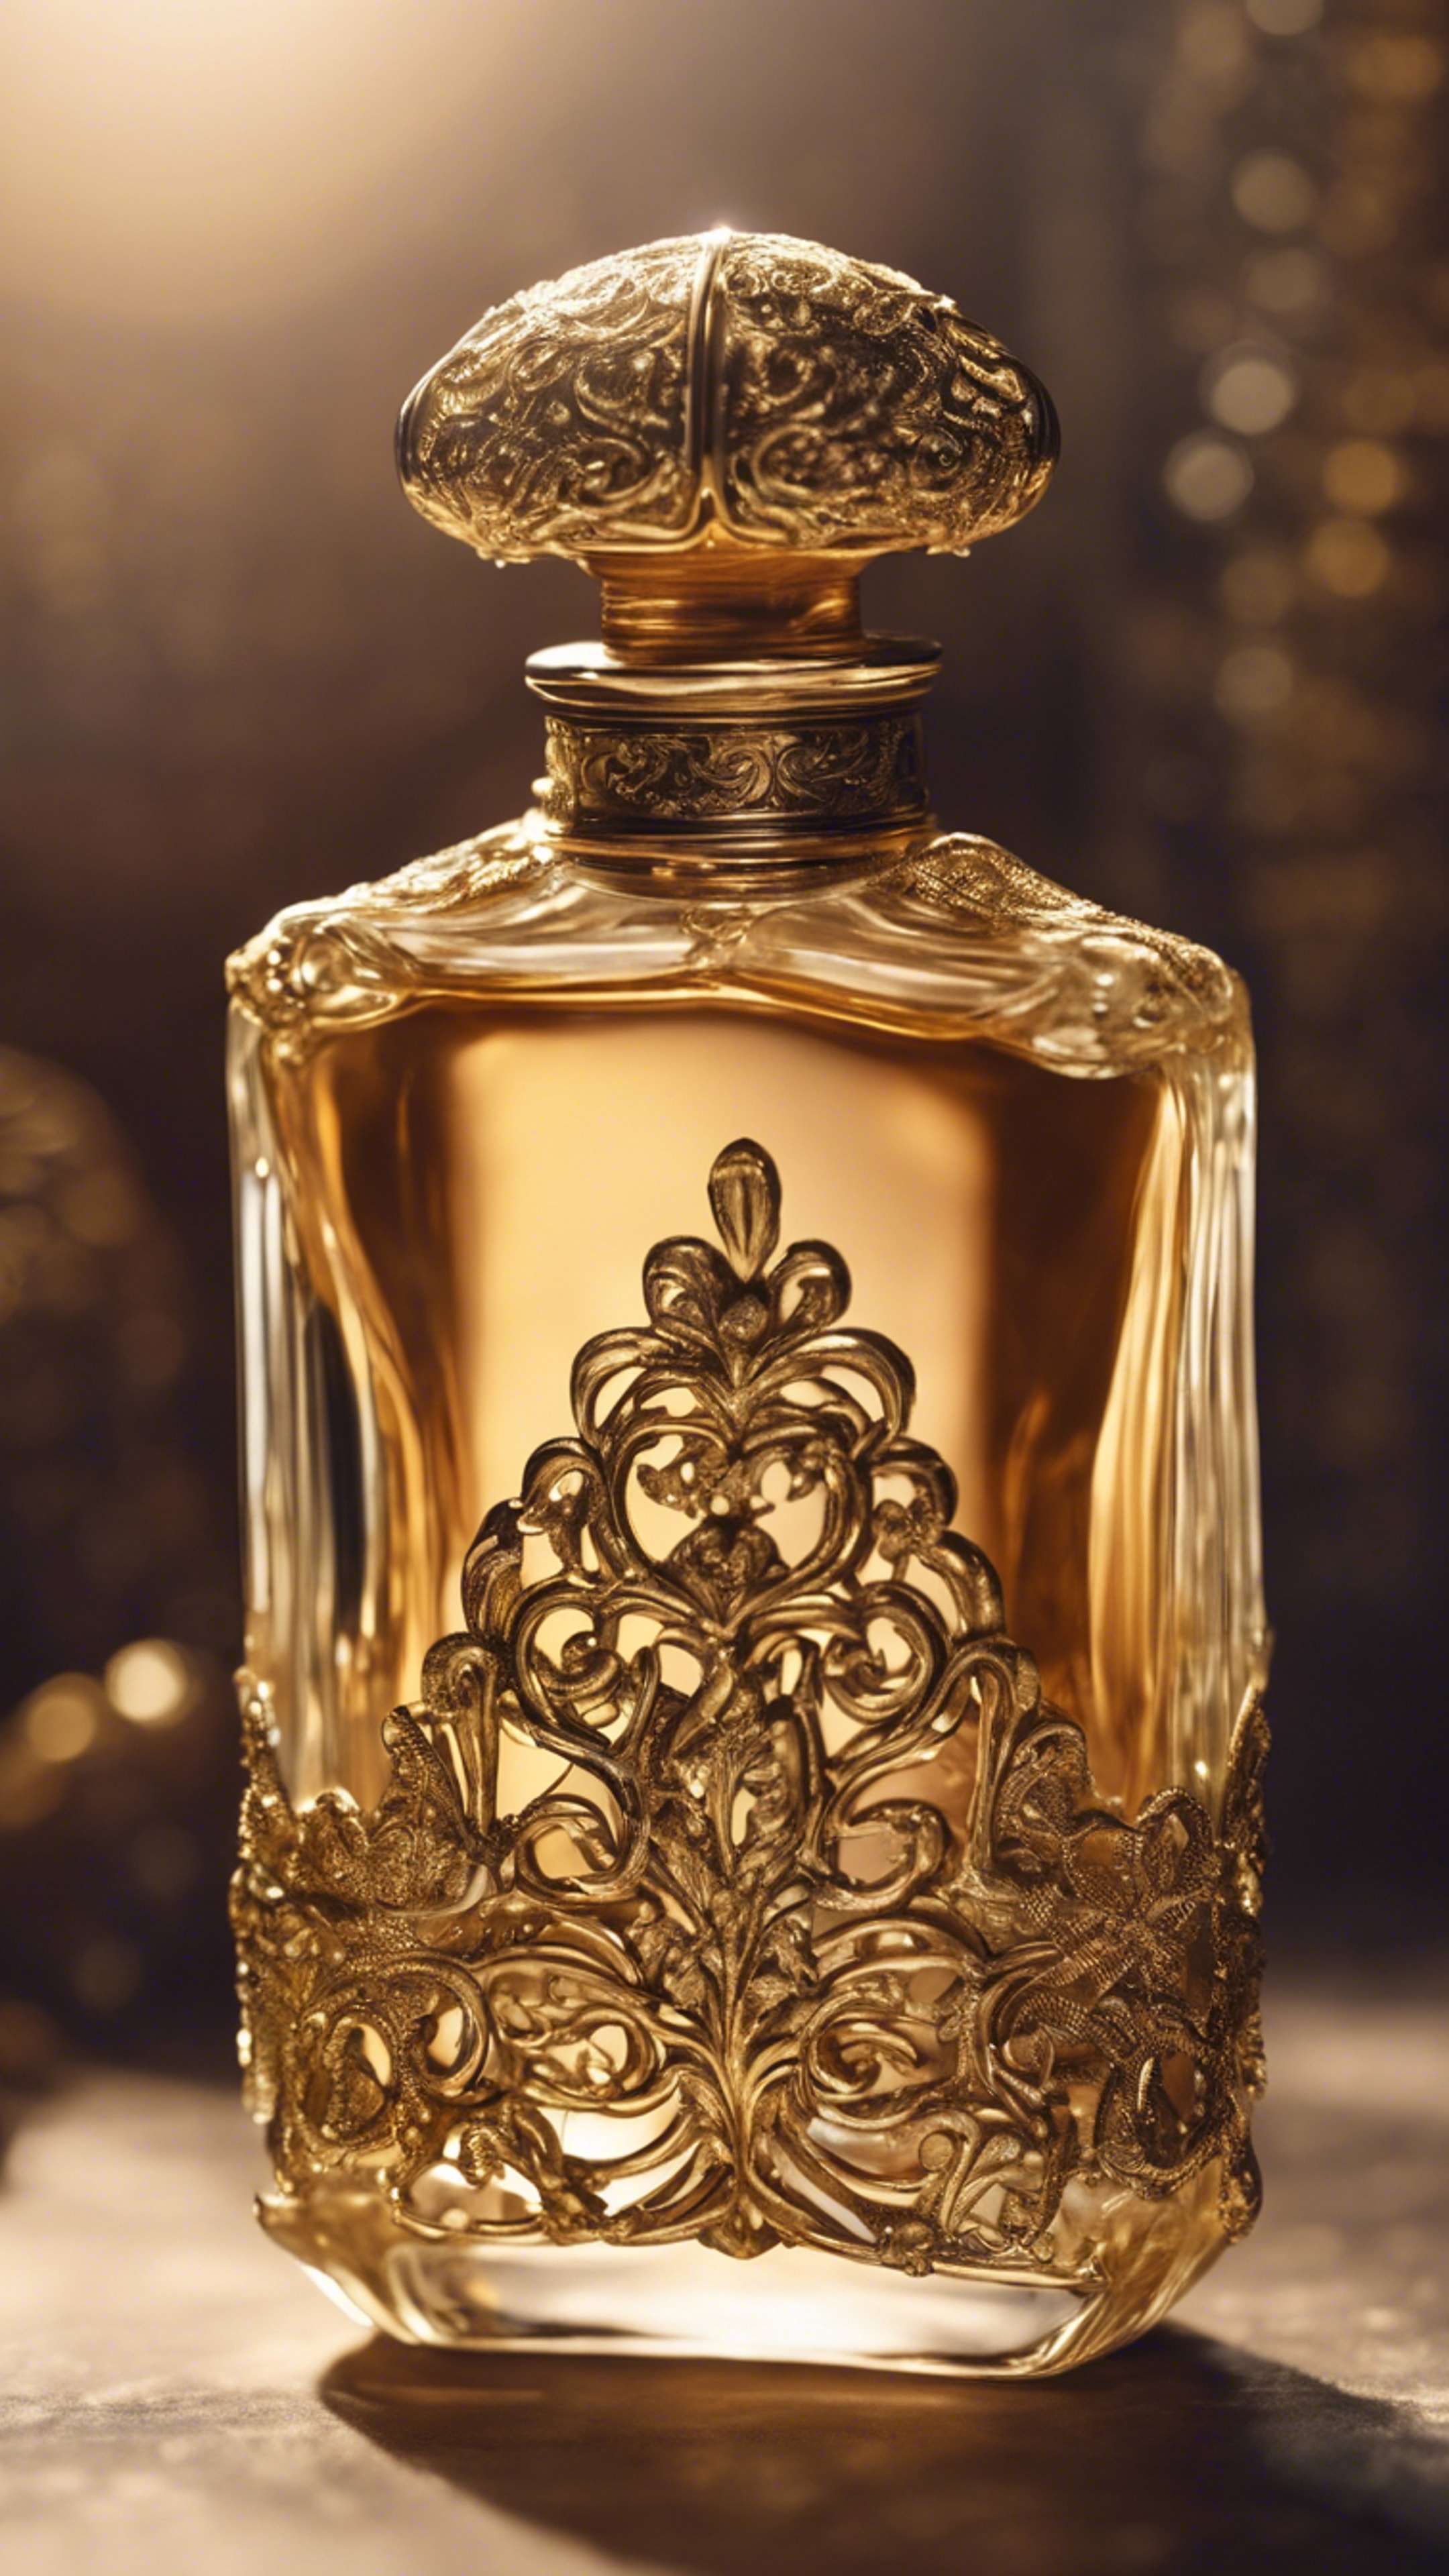 An antique perfume bottle with delicate gold filigree luxury cosmetic item. Hintergrund[fe361f22190a4891a6d9]